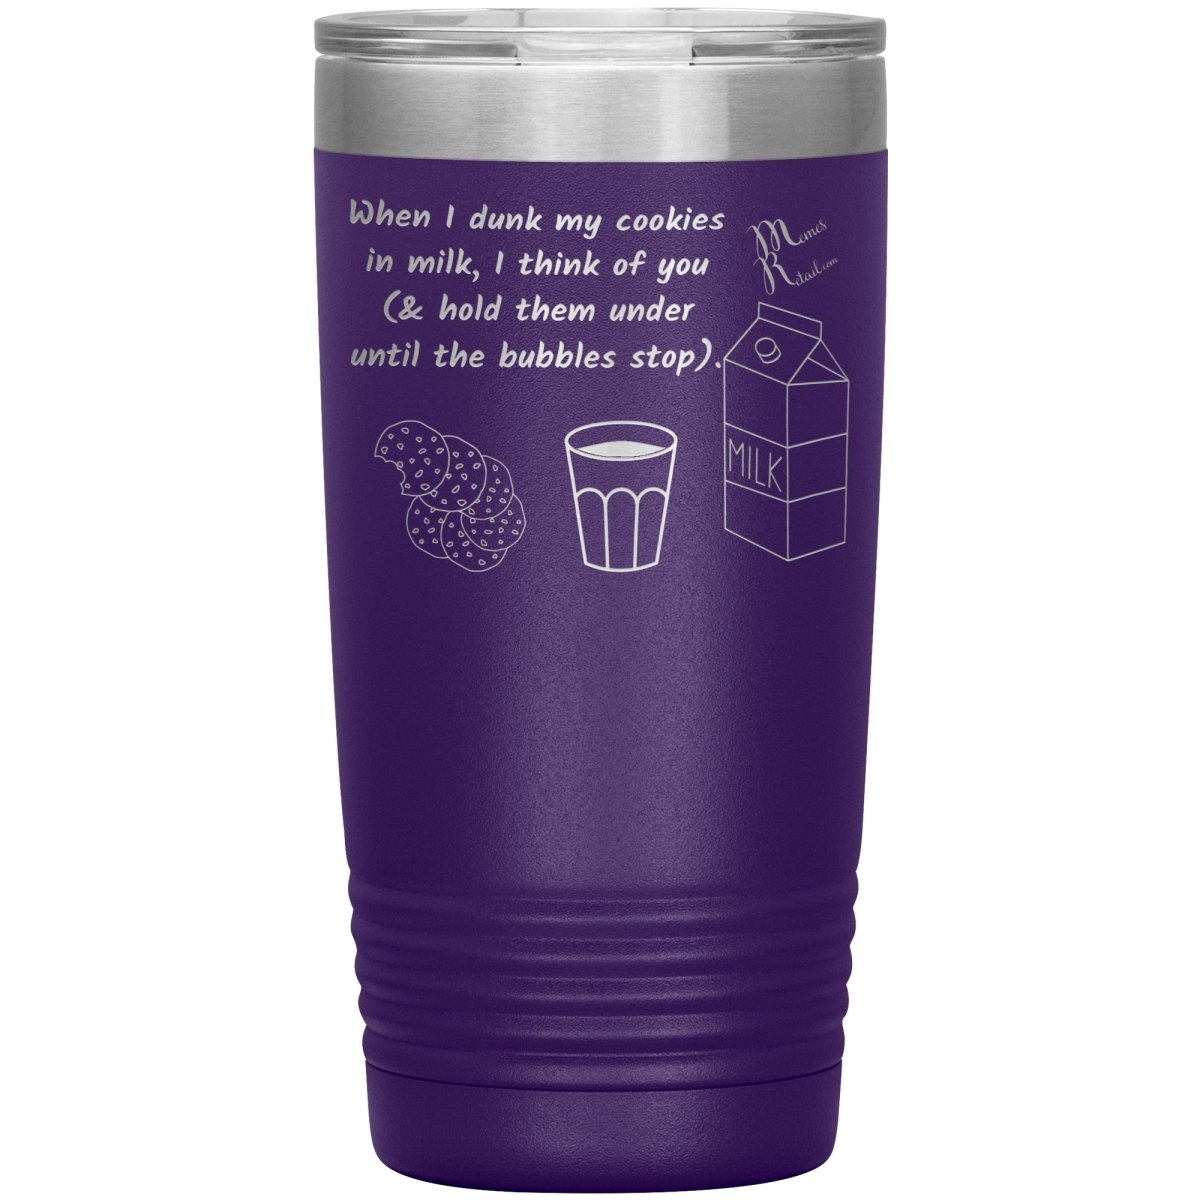 When I dunk My Cookies in Milk, I think of You - Tumblers, 20oz Insulated Tumbler / Purple - MemesRetail.com